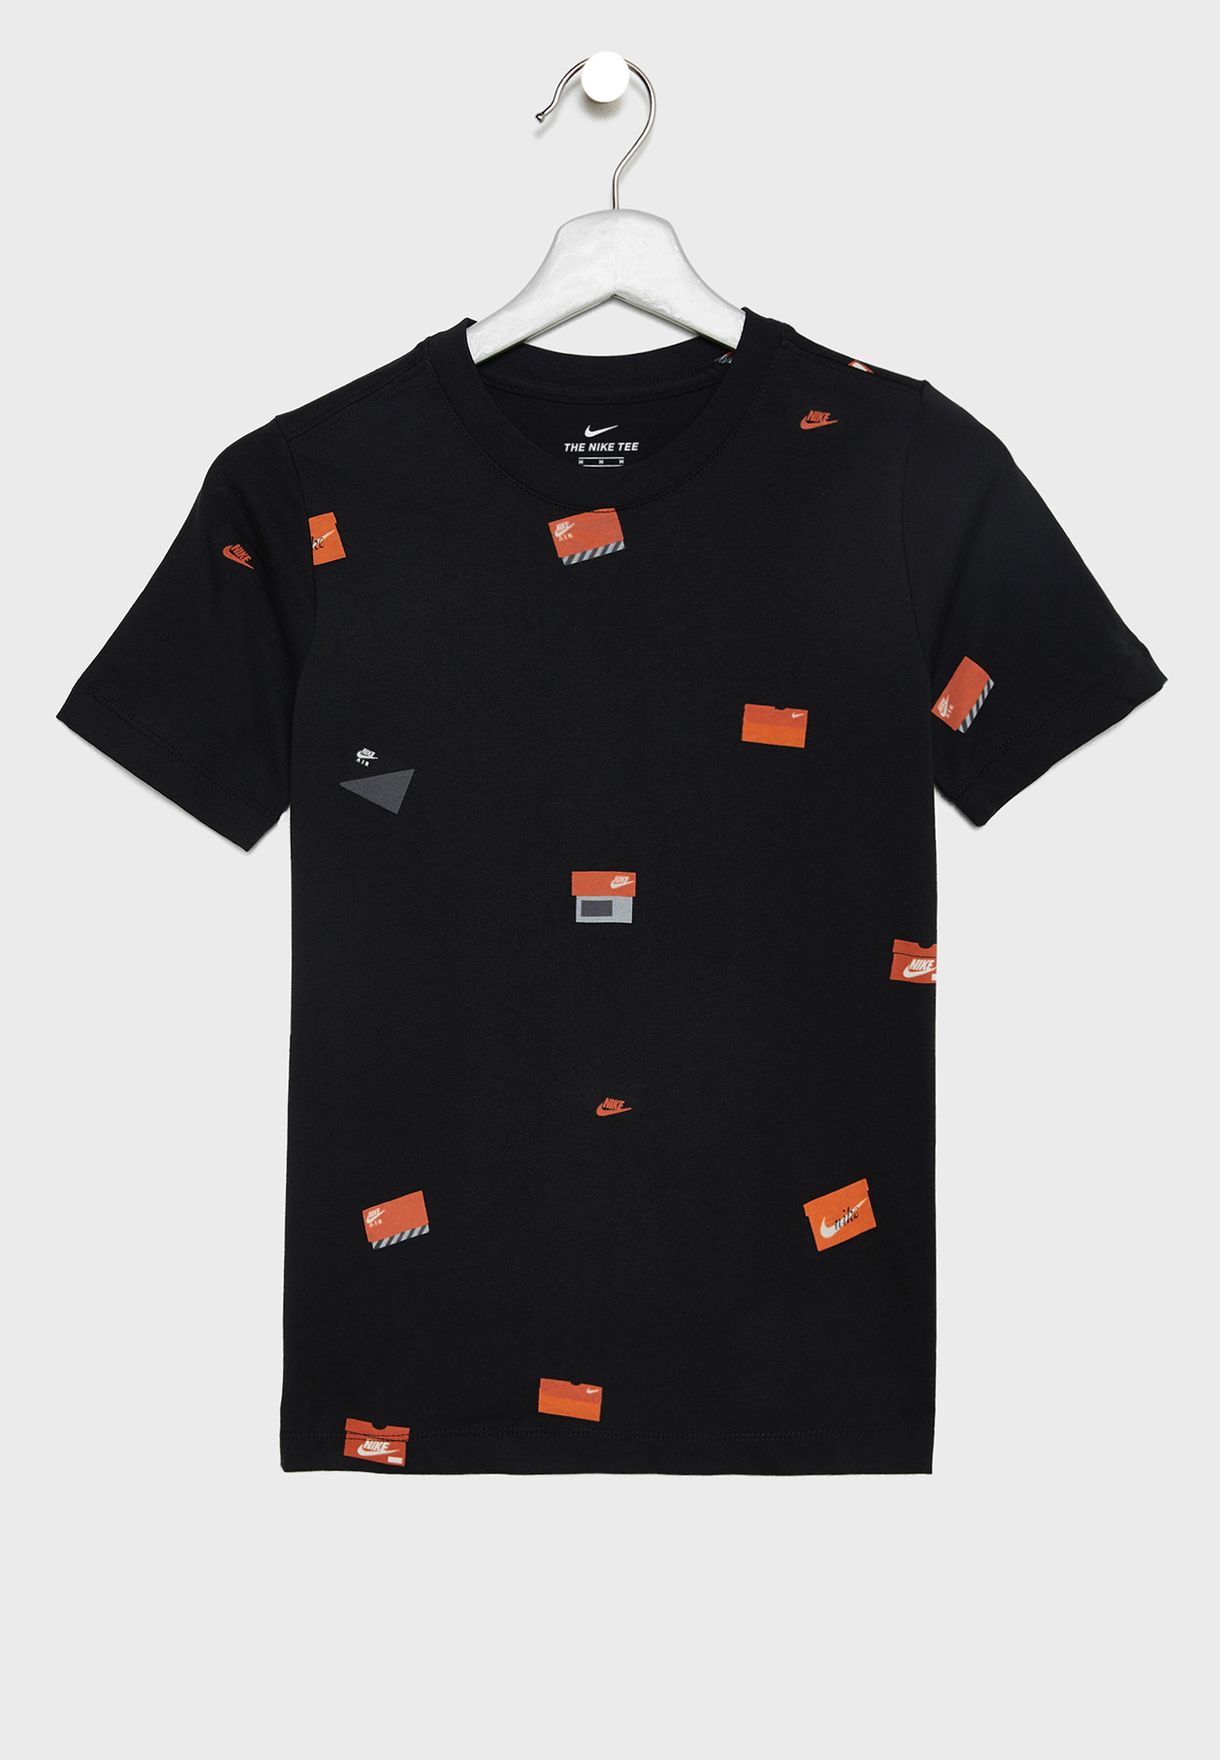 nike shirt with shoe boxes